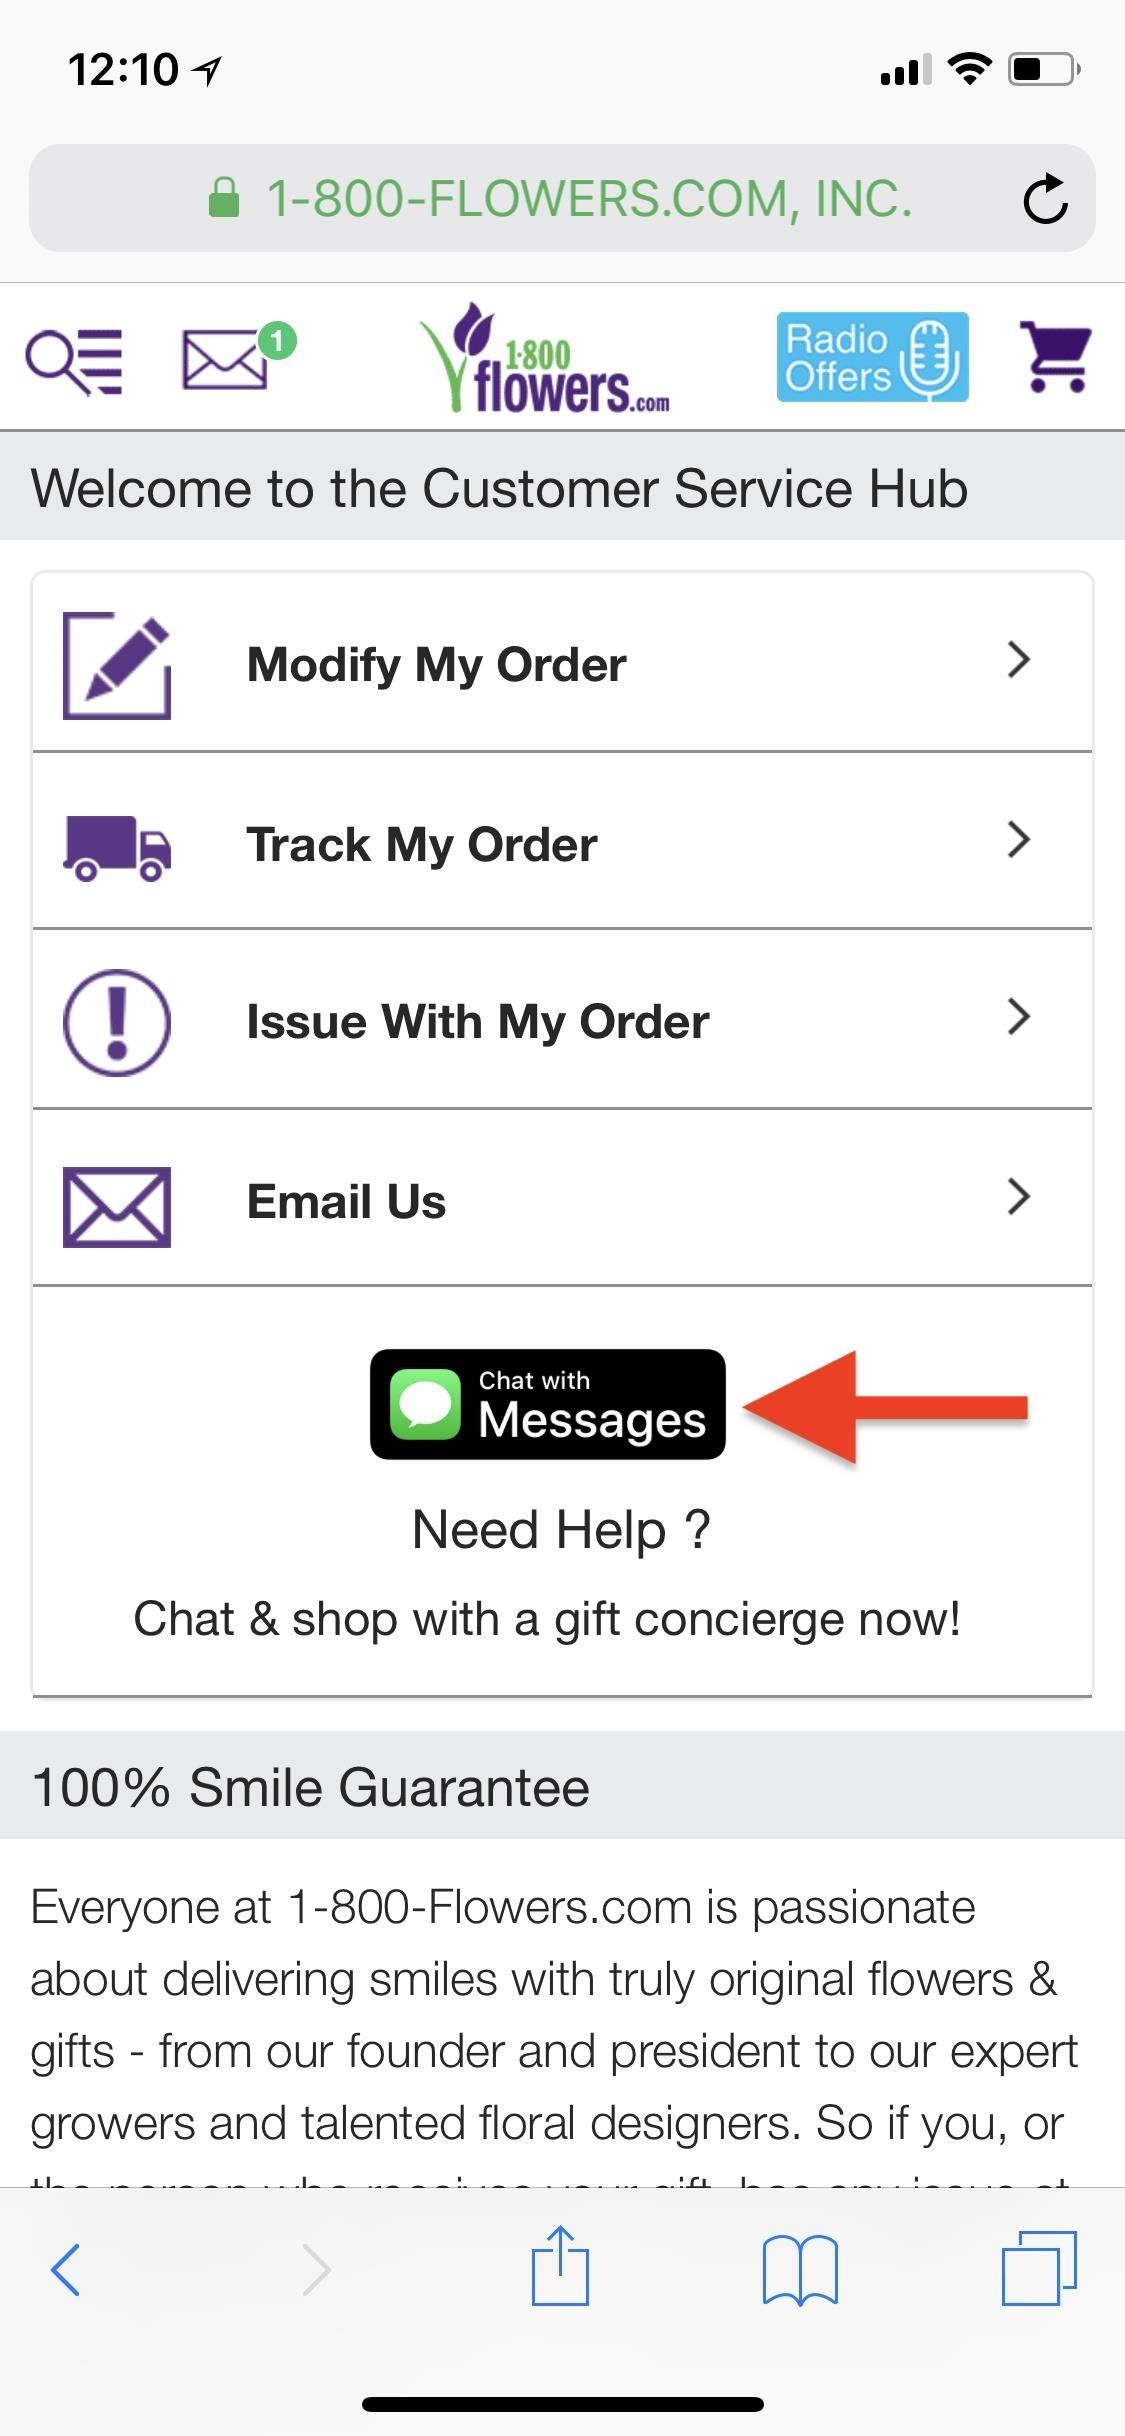 How to Use Business Chat on Your iPhone to Securely Interact with Companies via iMessage